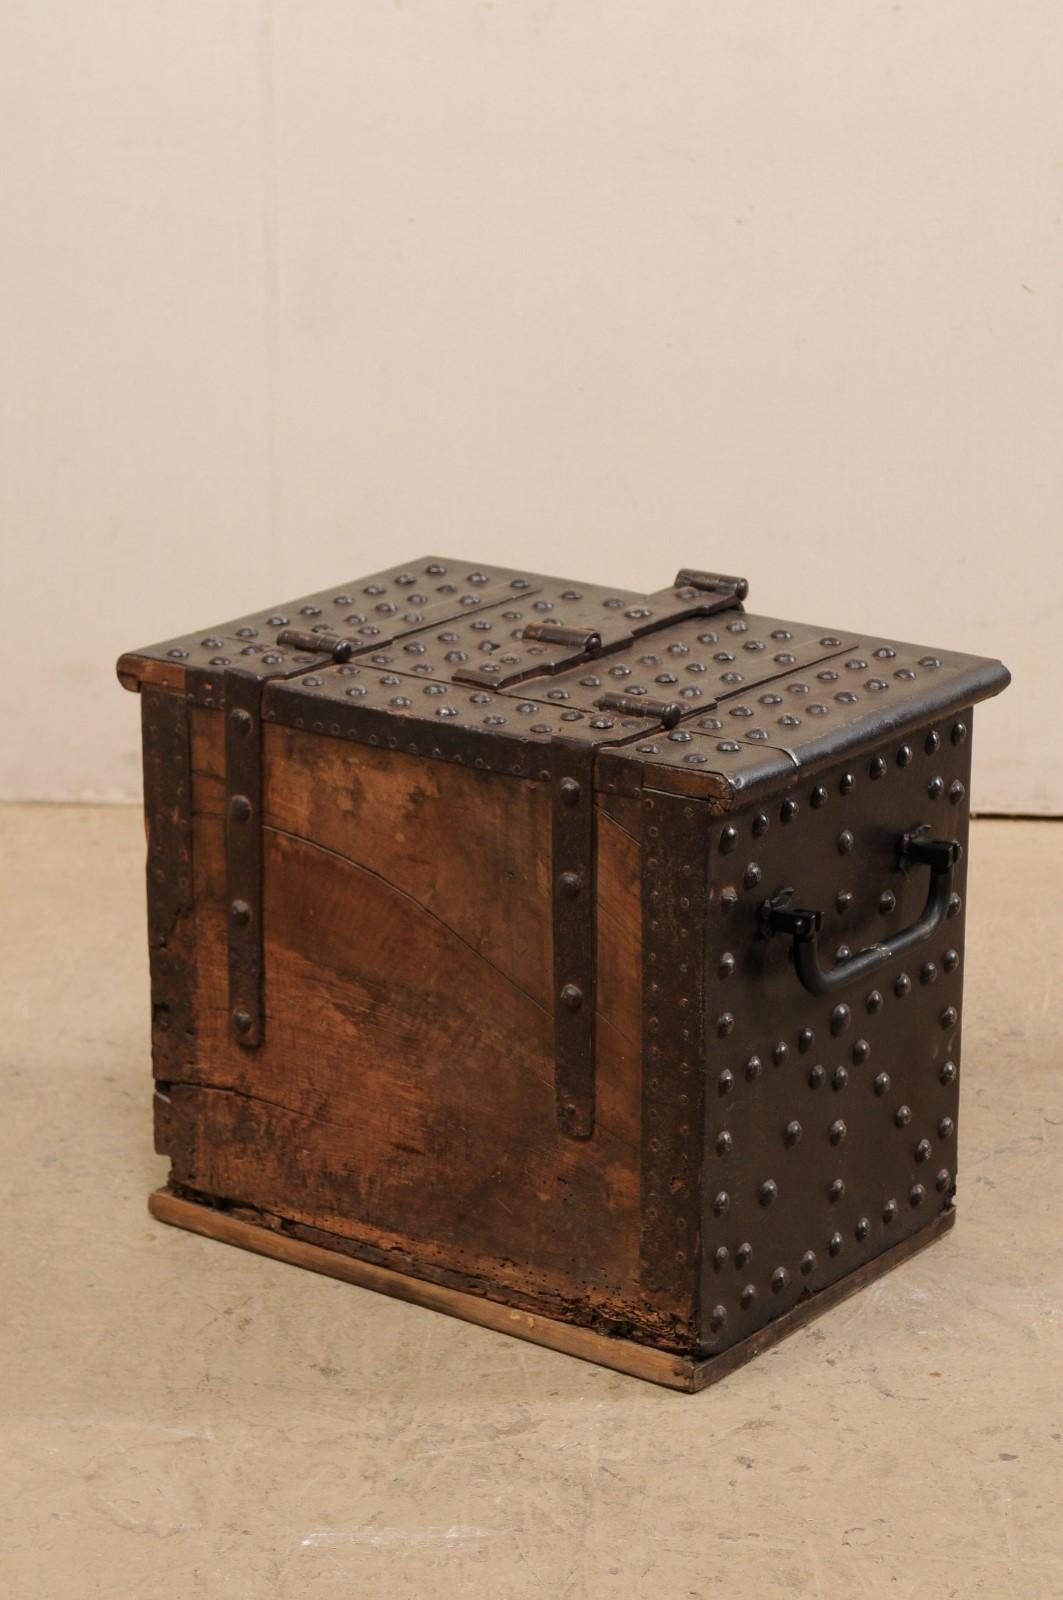 18th Century Spanish Iron-Clad Strong Box in Working Condition with Original Key For Sale 4